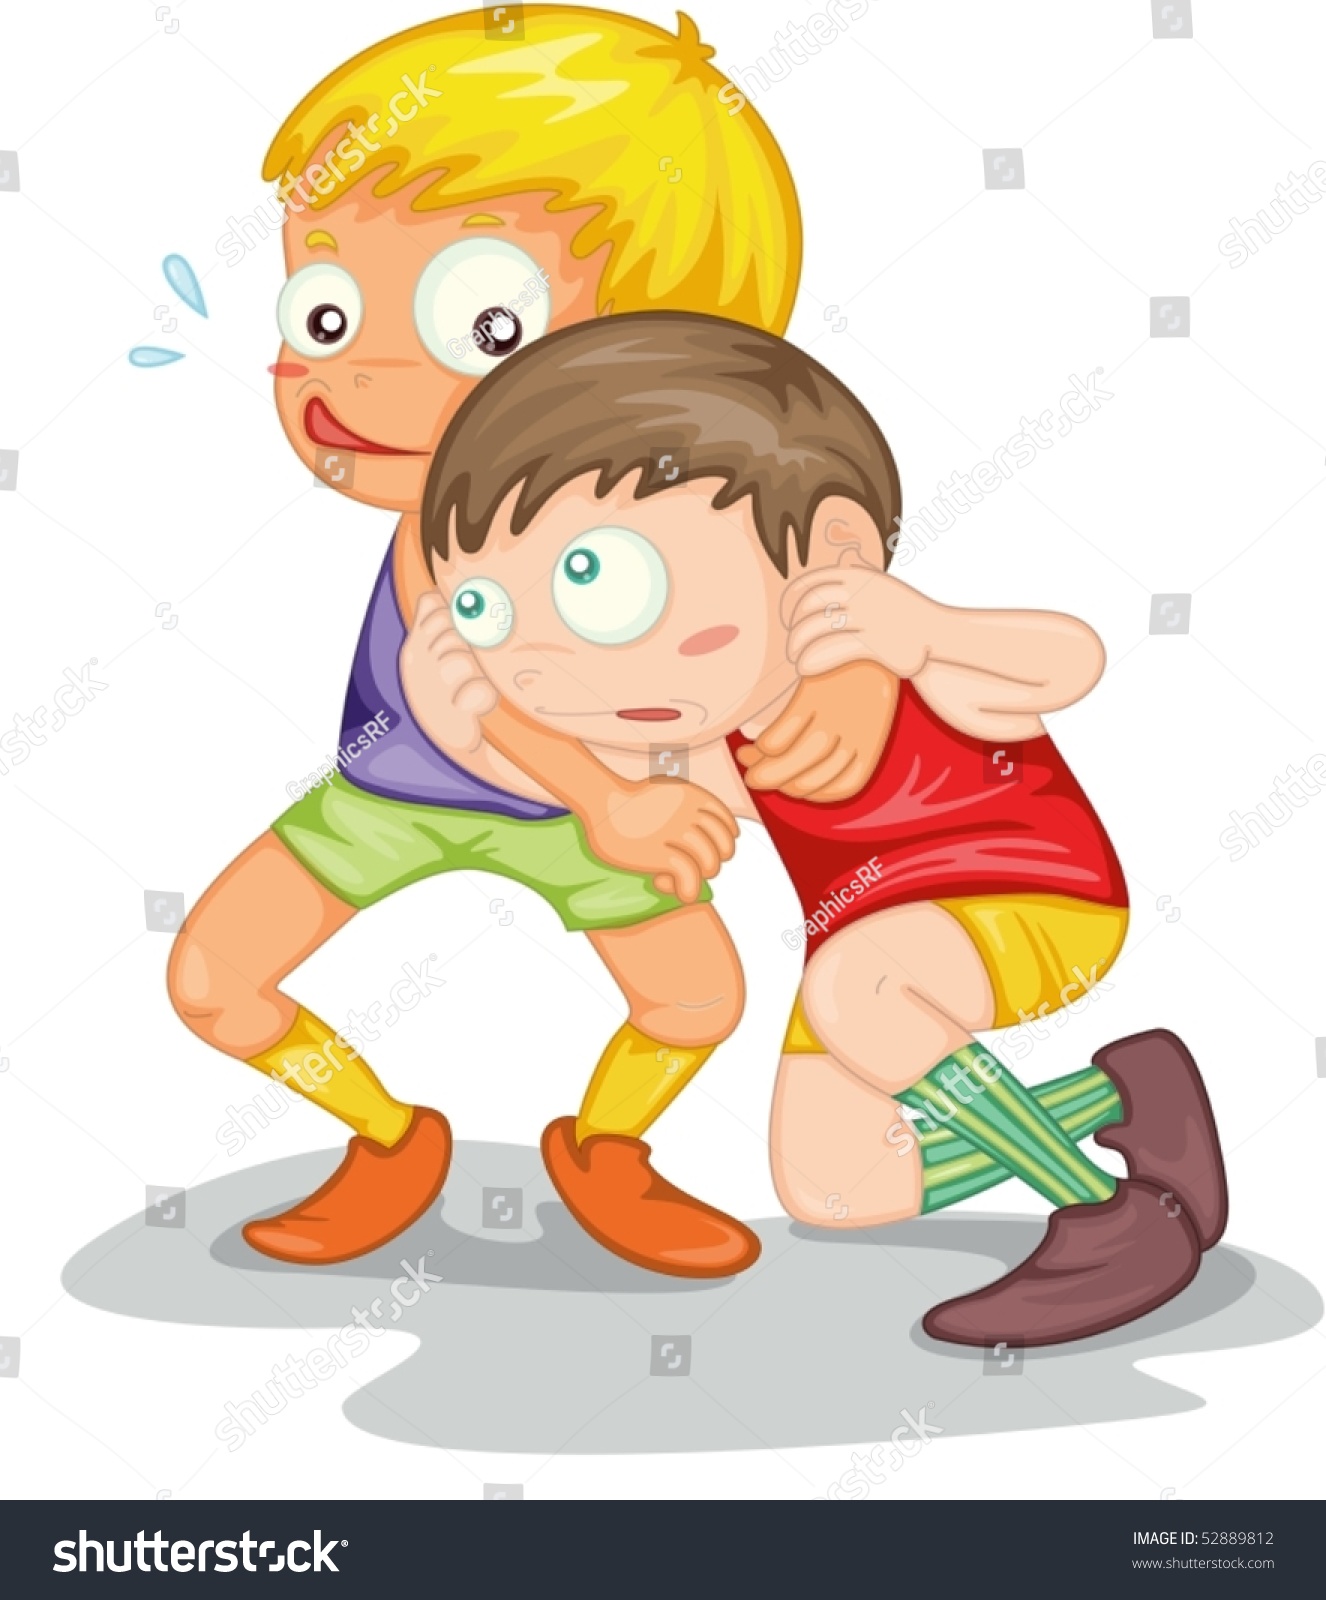 boy and girl fighting clipart - photo #40